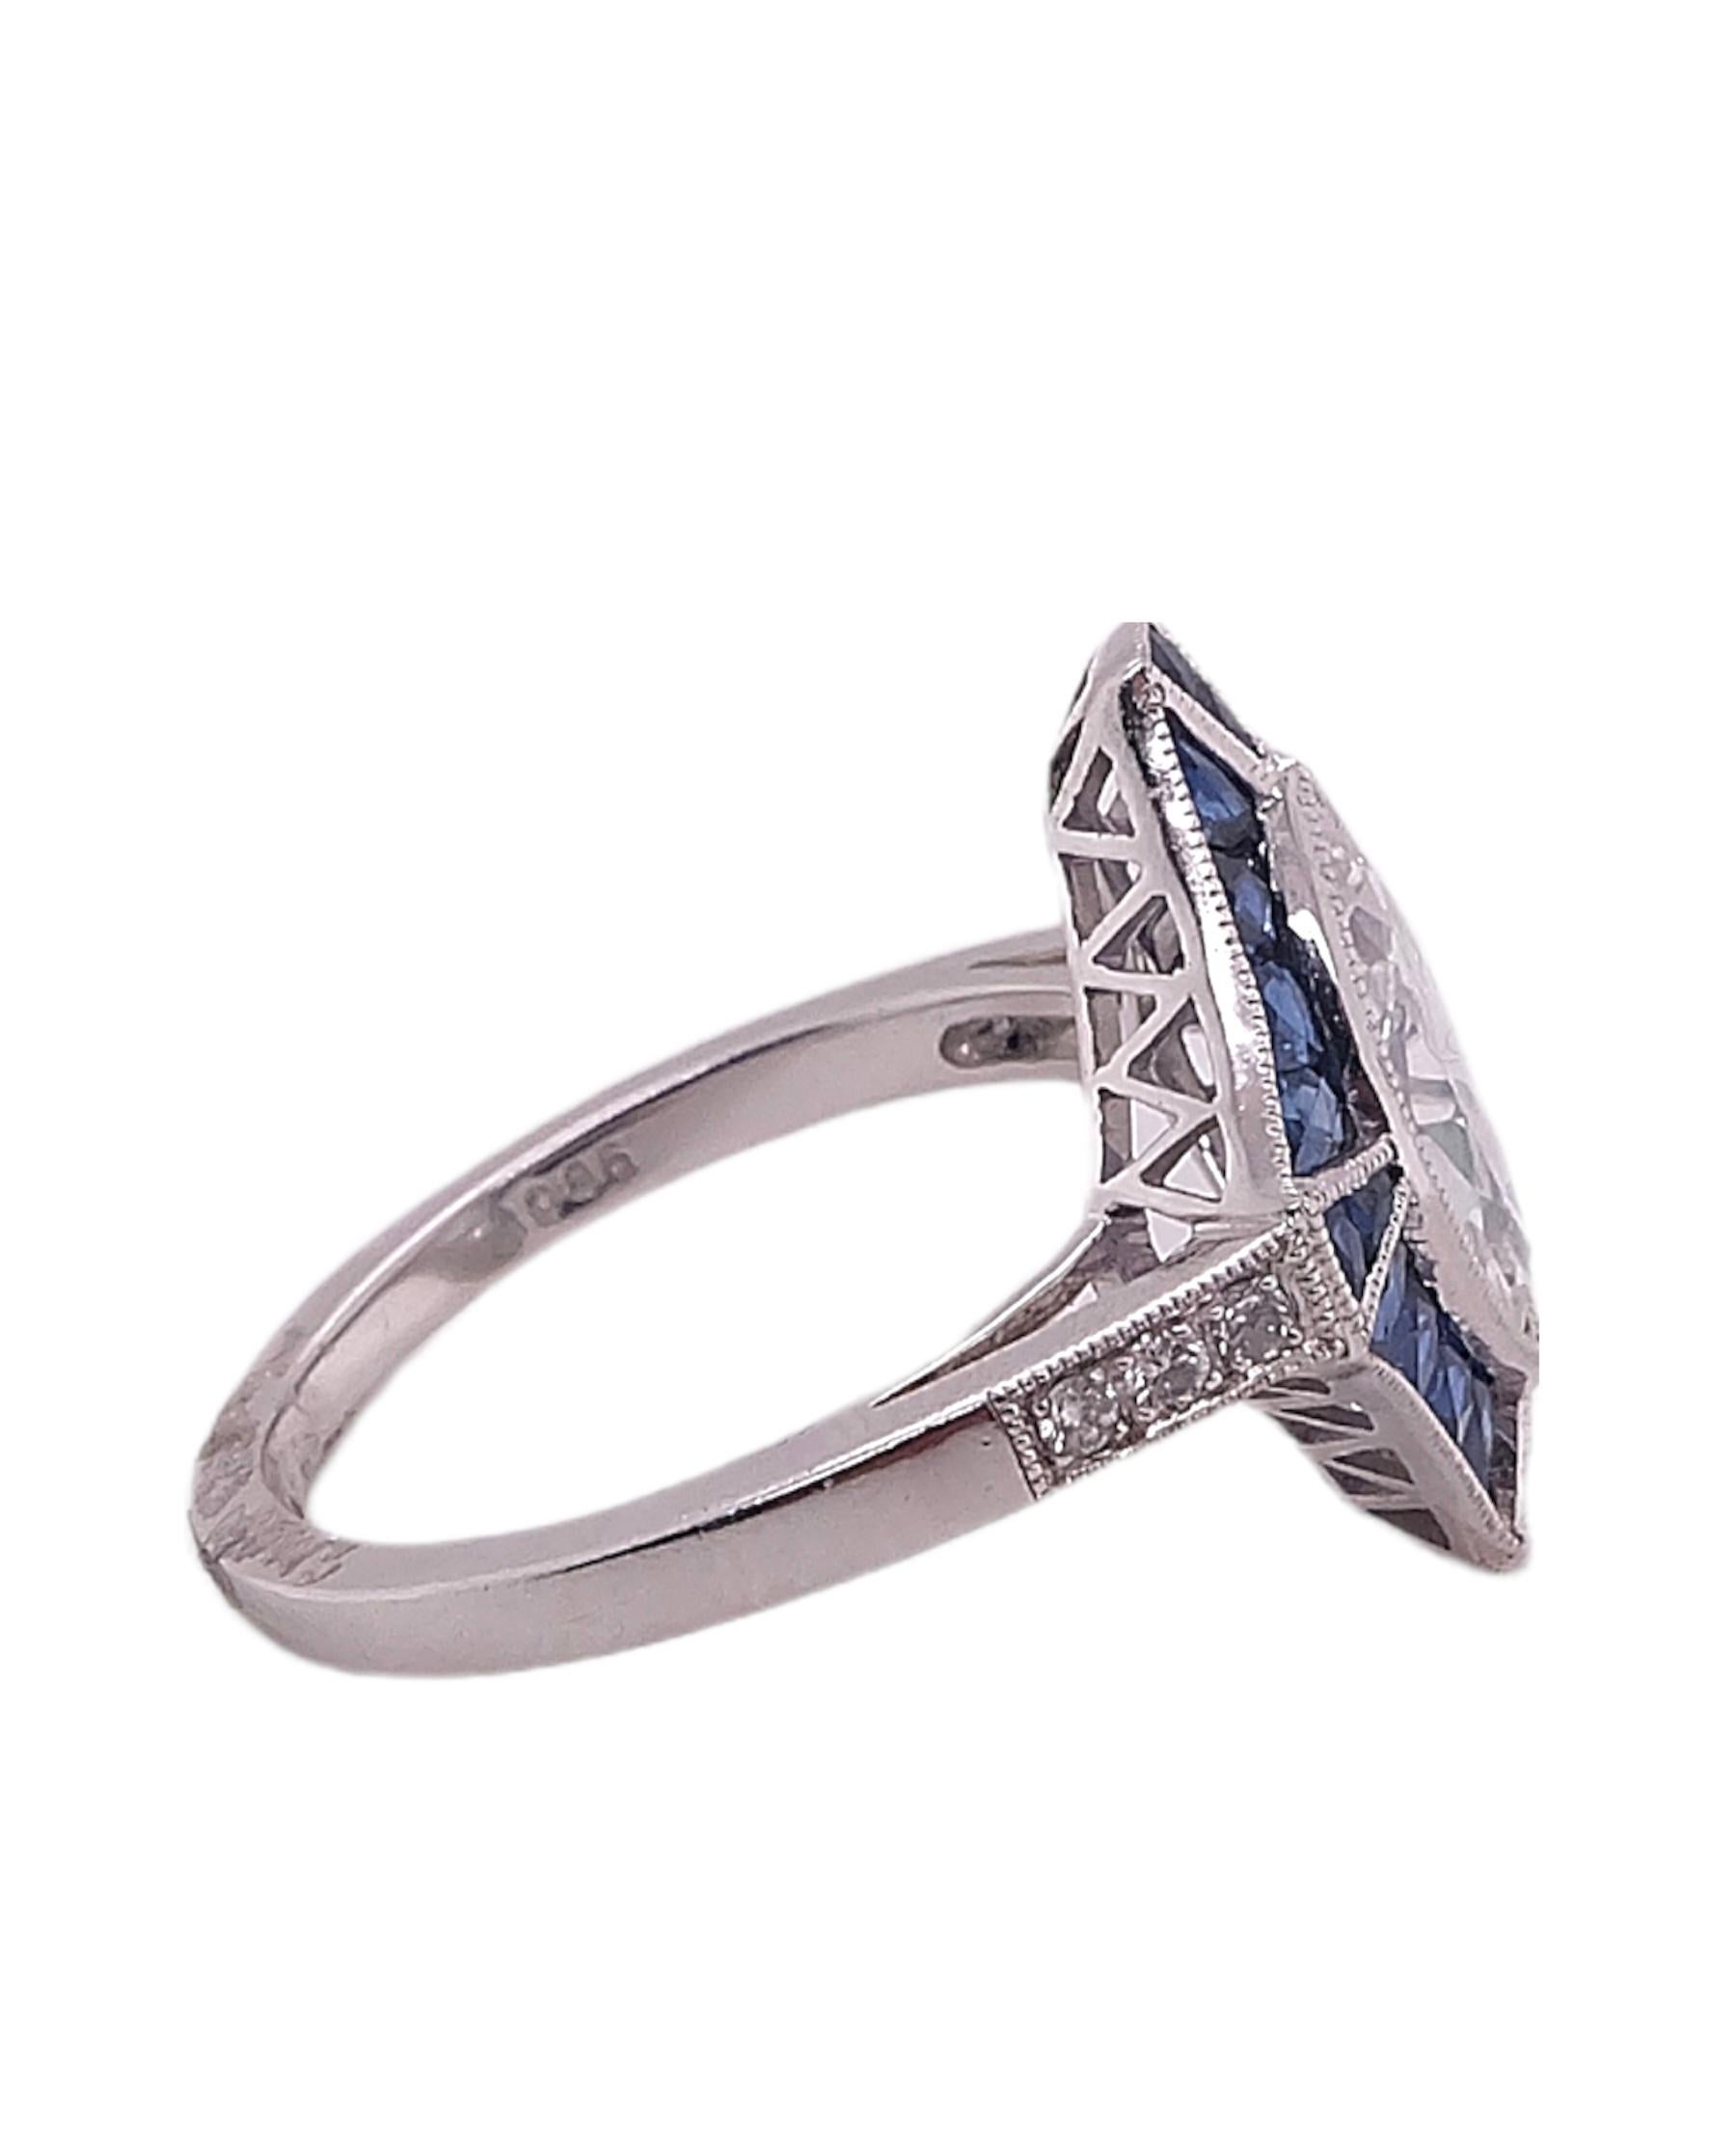 An Art Deco platinum ring with 1.22 Marquise Cut center stone complemented with 0.97 carats blue sapphires and 0.06 carats round diamonds made by Sophia D. Ring is available for resizing.

Sophia D by Joseph Dardashti LTD has been known worldwide